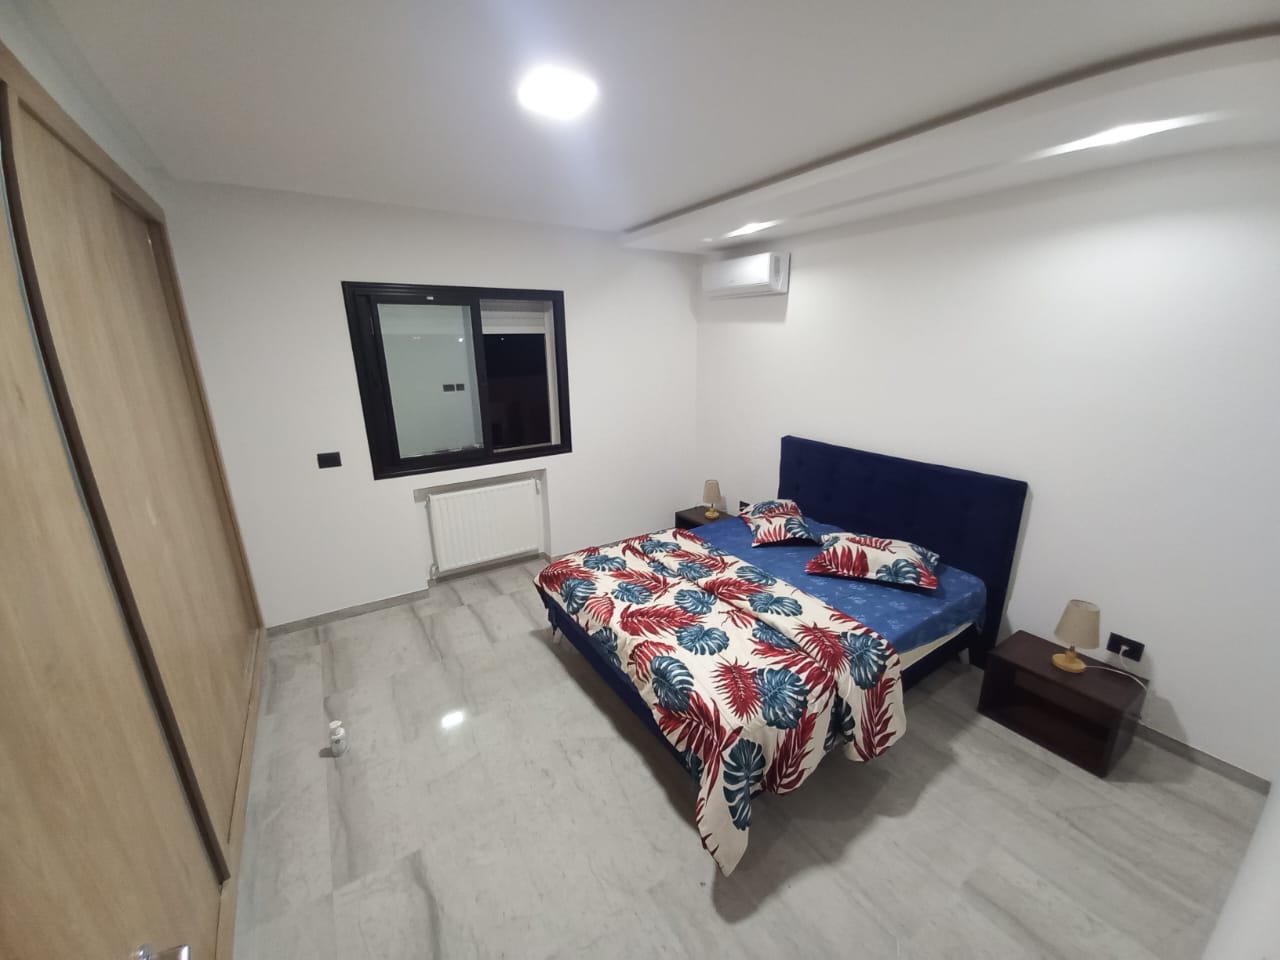 Ain Zaghouan Ain Zaghouan Location Appart. 2 pices Appartement a deux chambre luxe